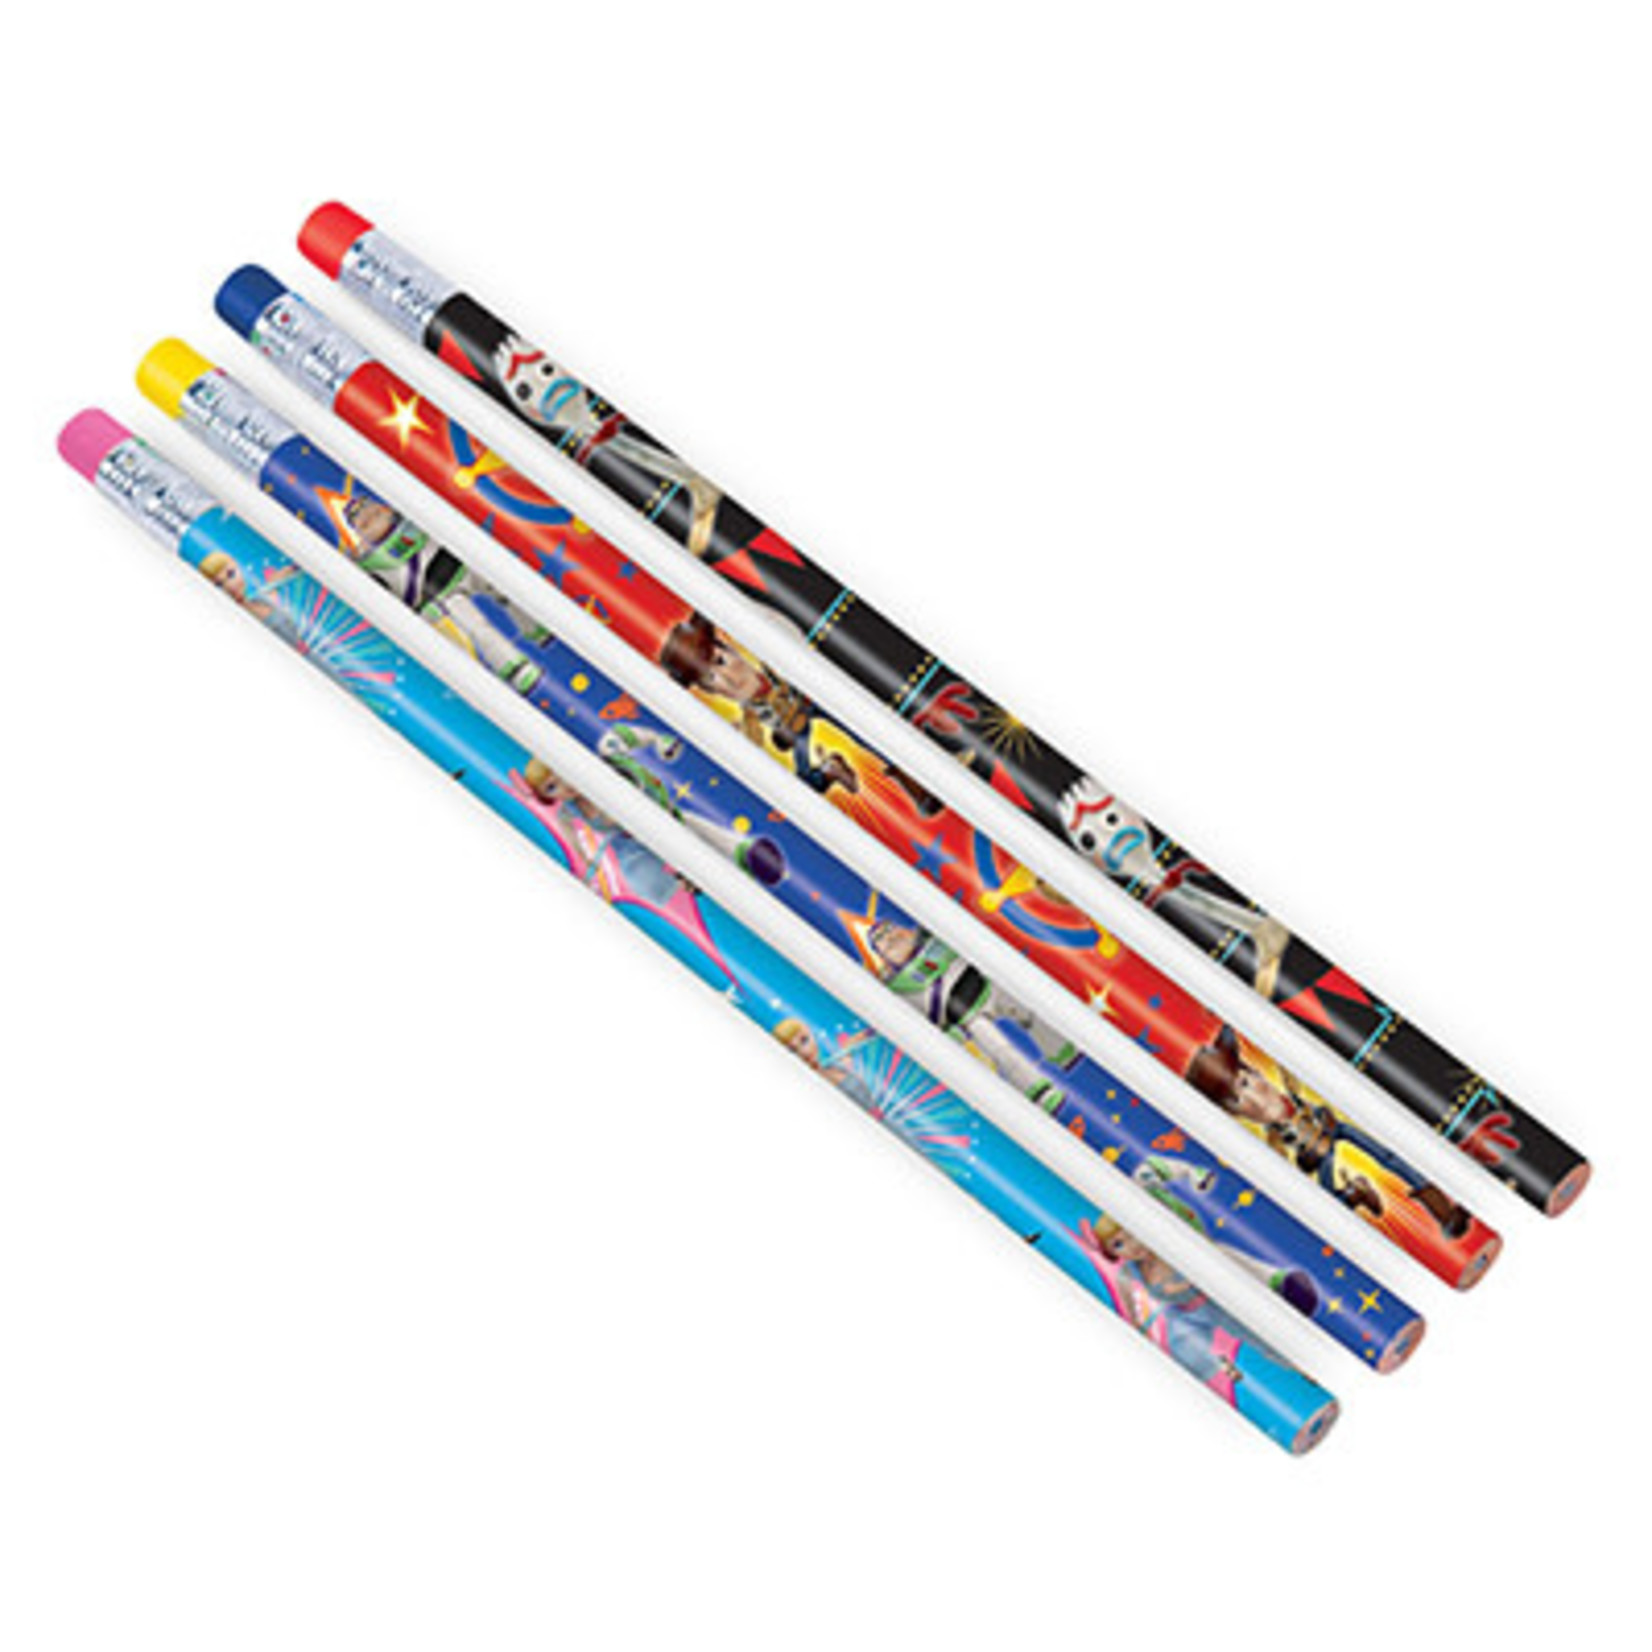 Amscan Toy Story 4 Pencils - 8ct.